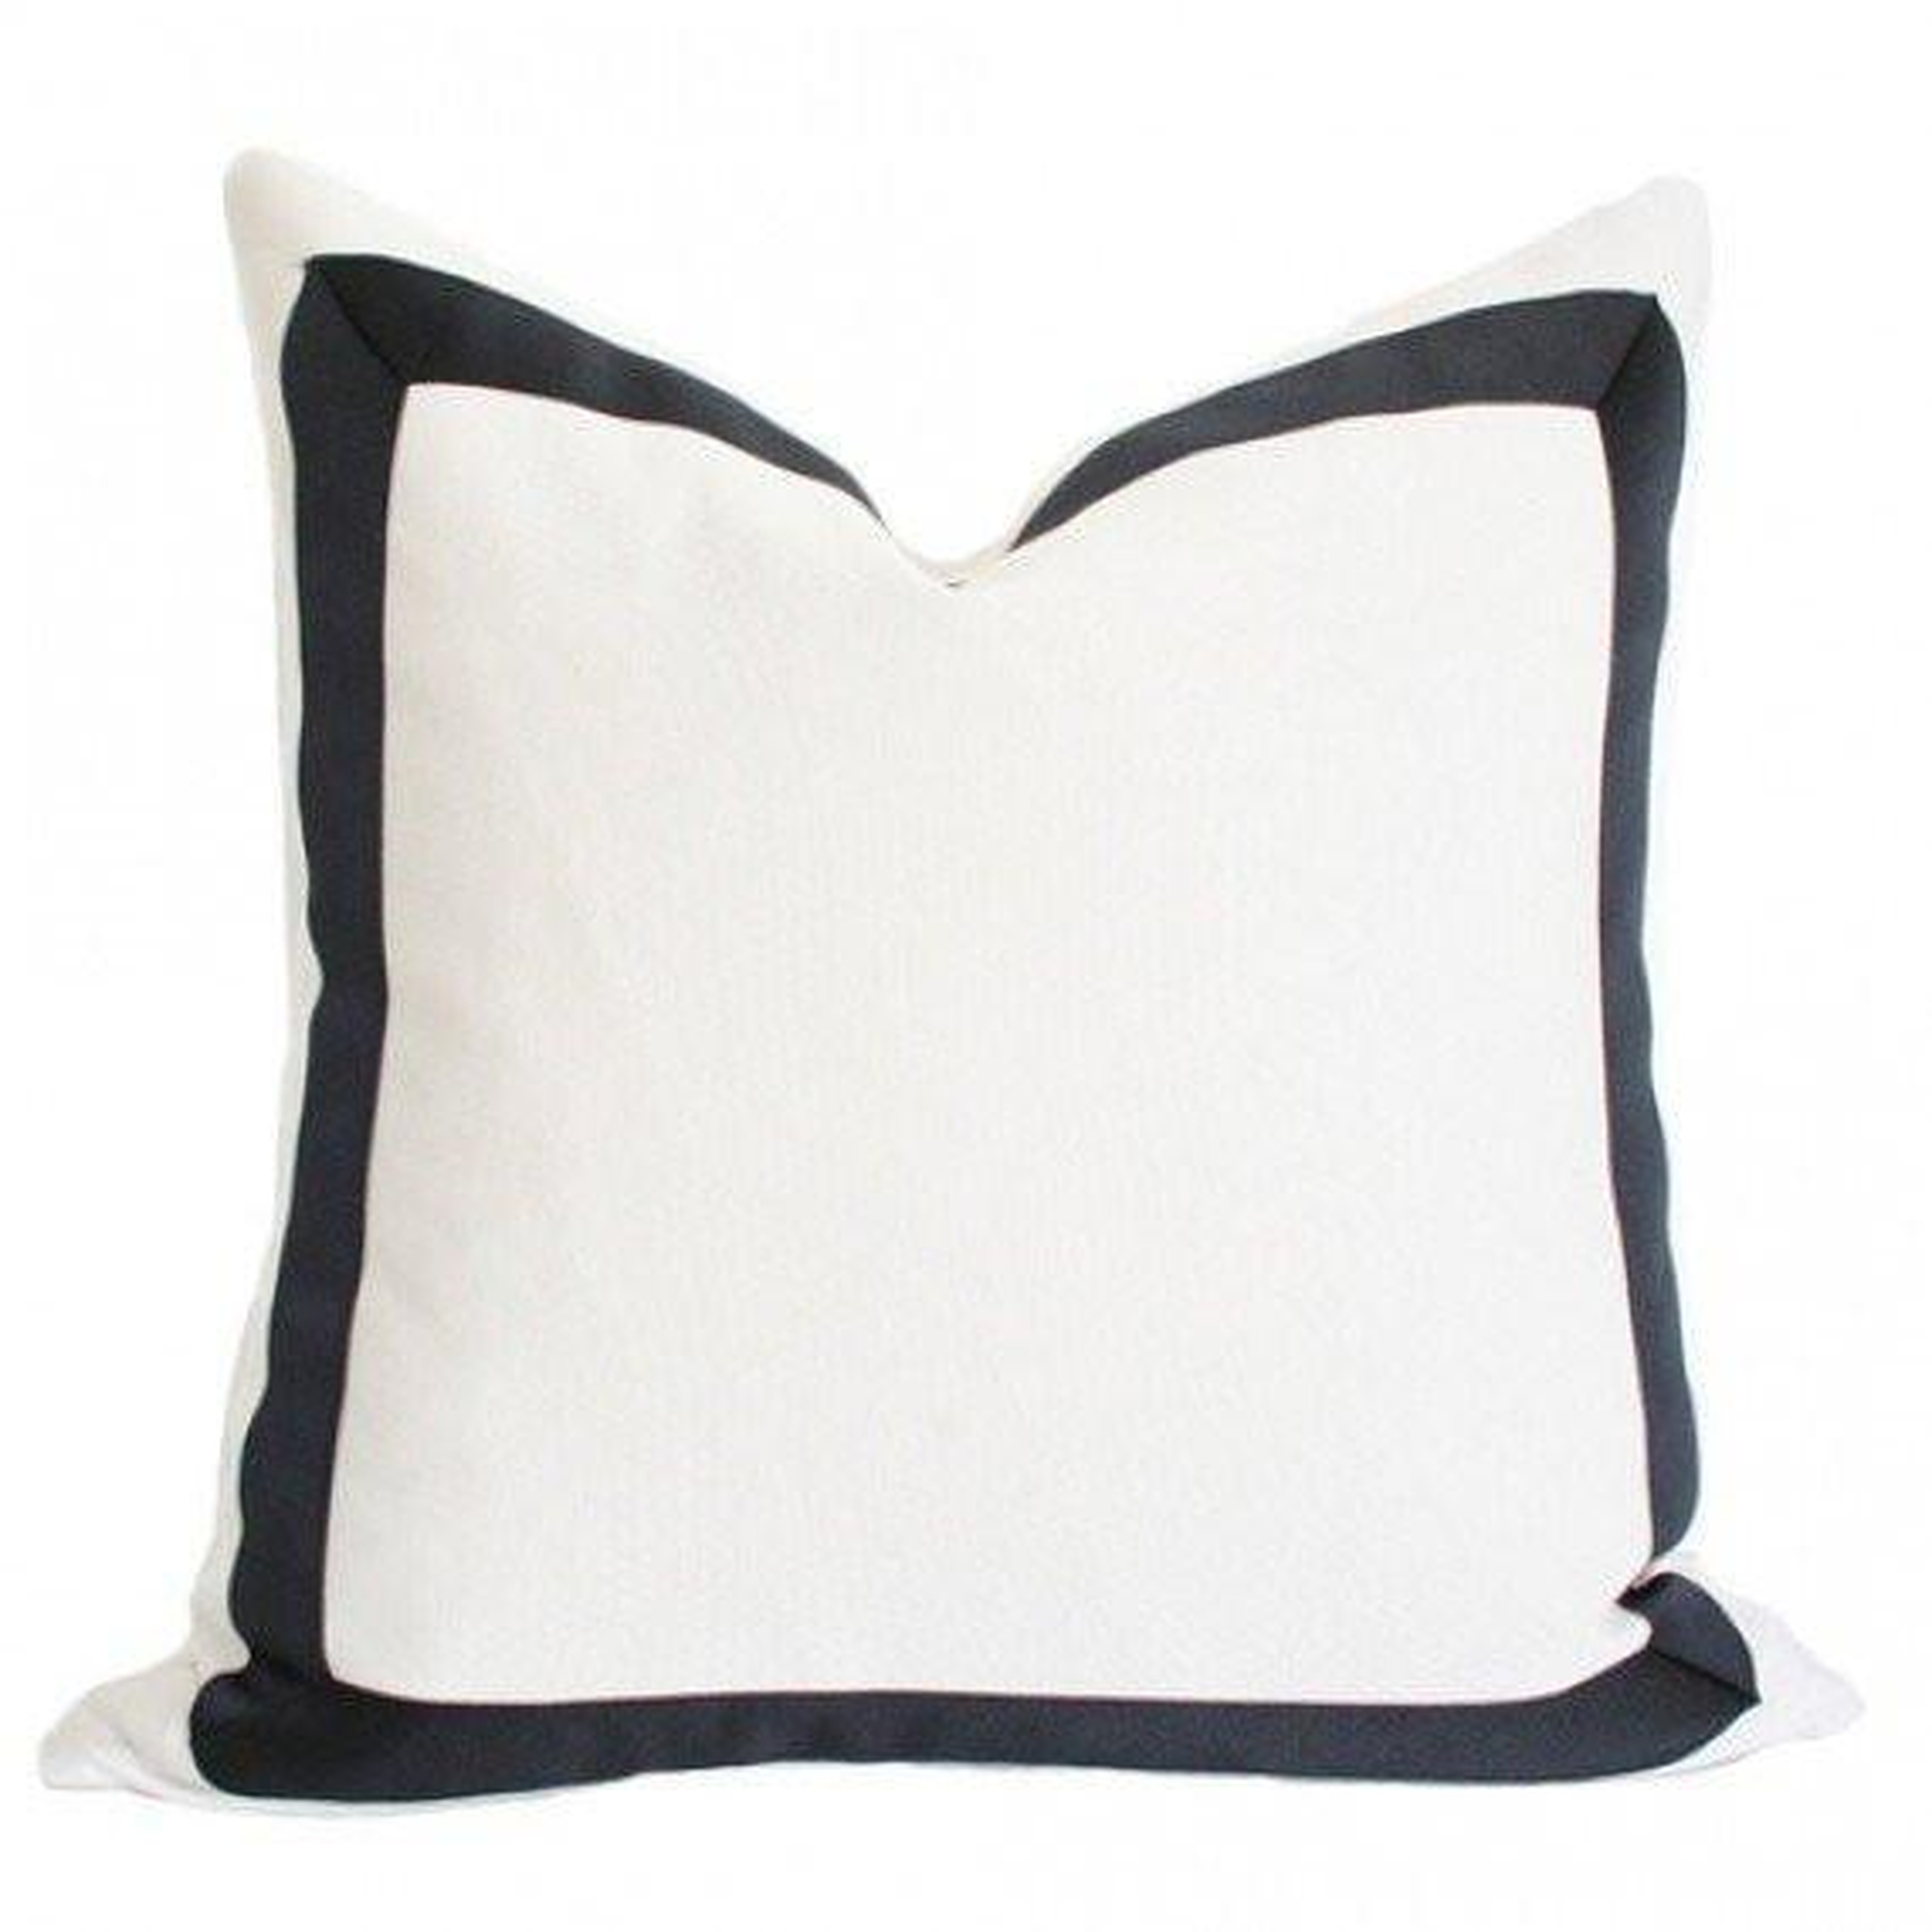 Solid White with Grosgrain Ribbon Border - 17x17 pillow cover / Black - Arianna Belle